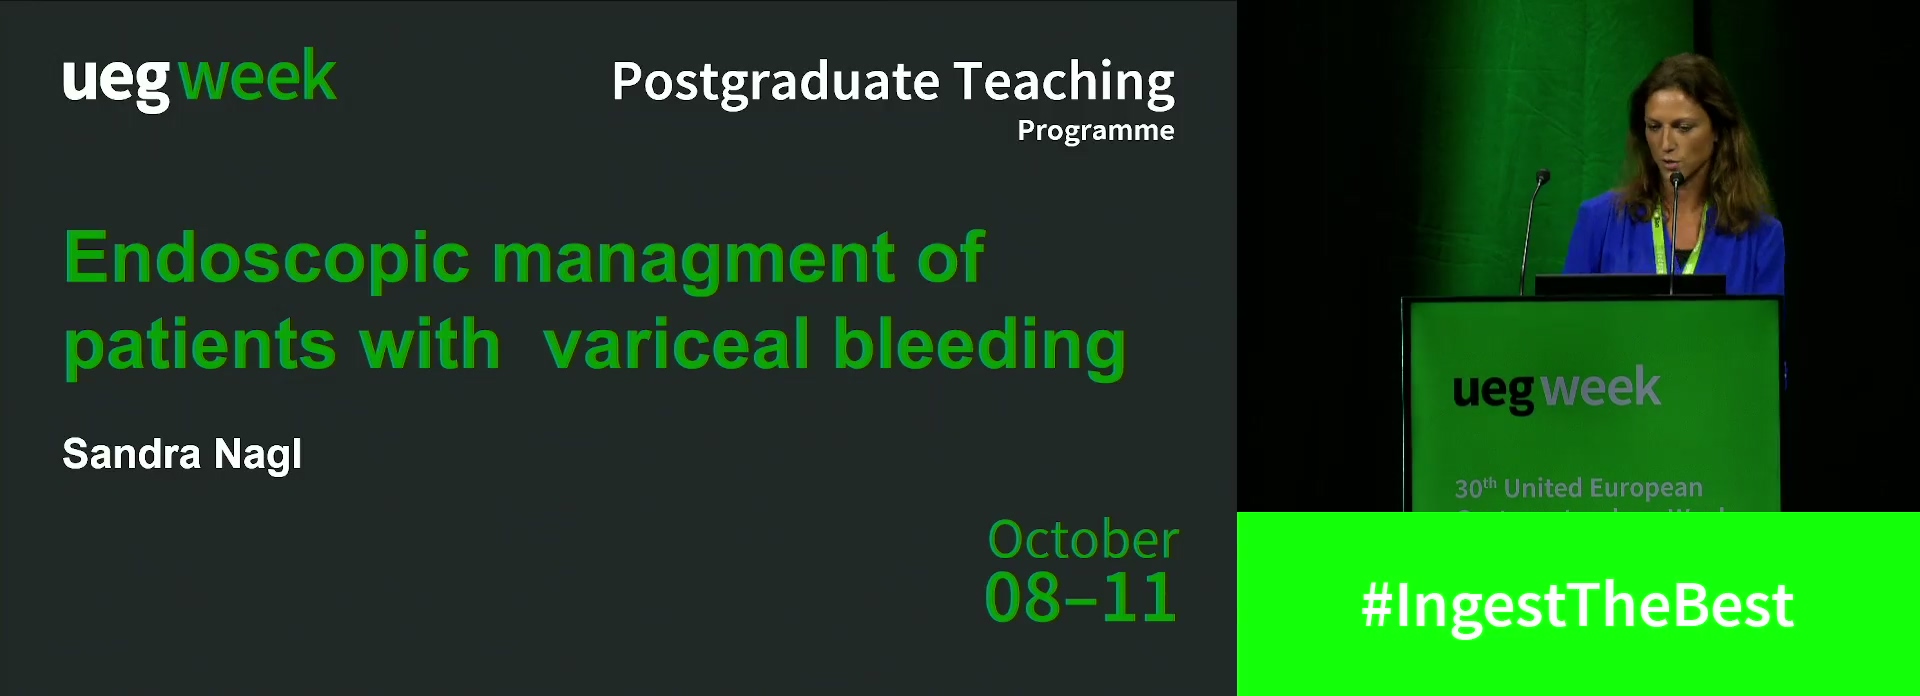 Endoscopic management of patients with variceal bleeding